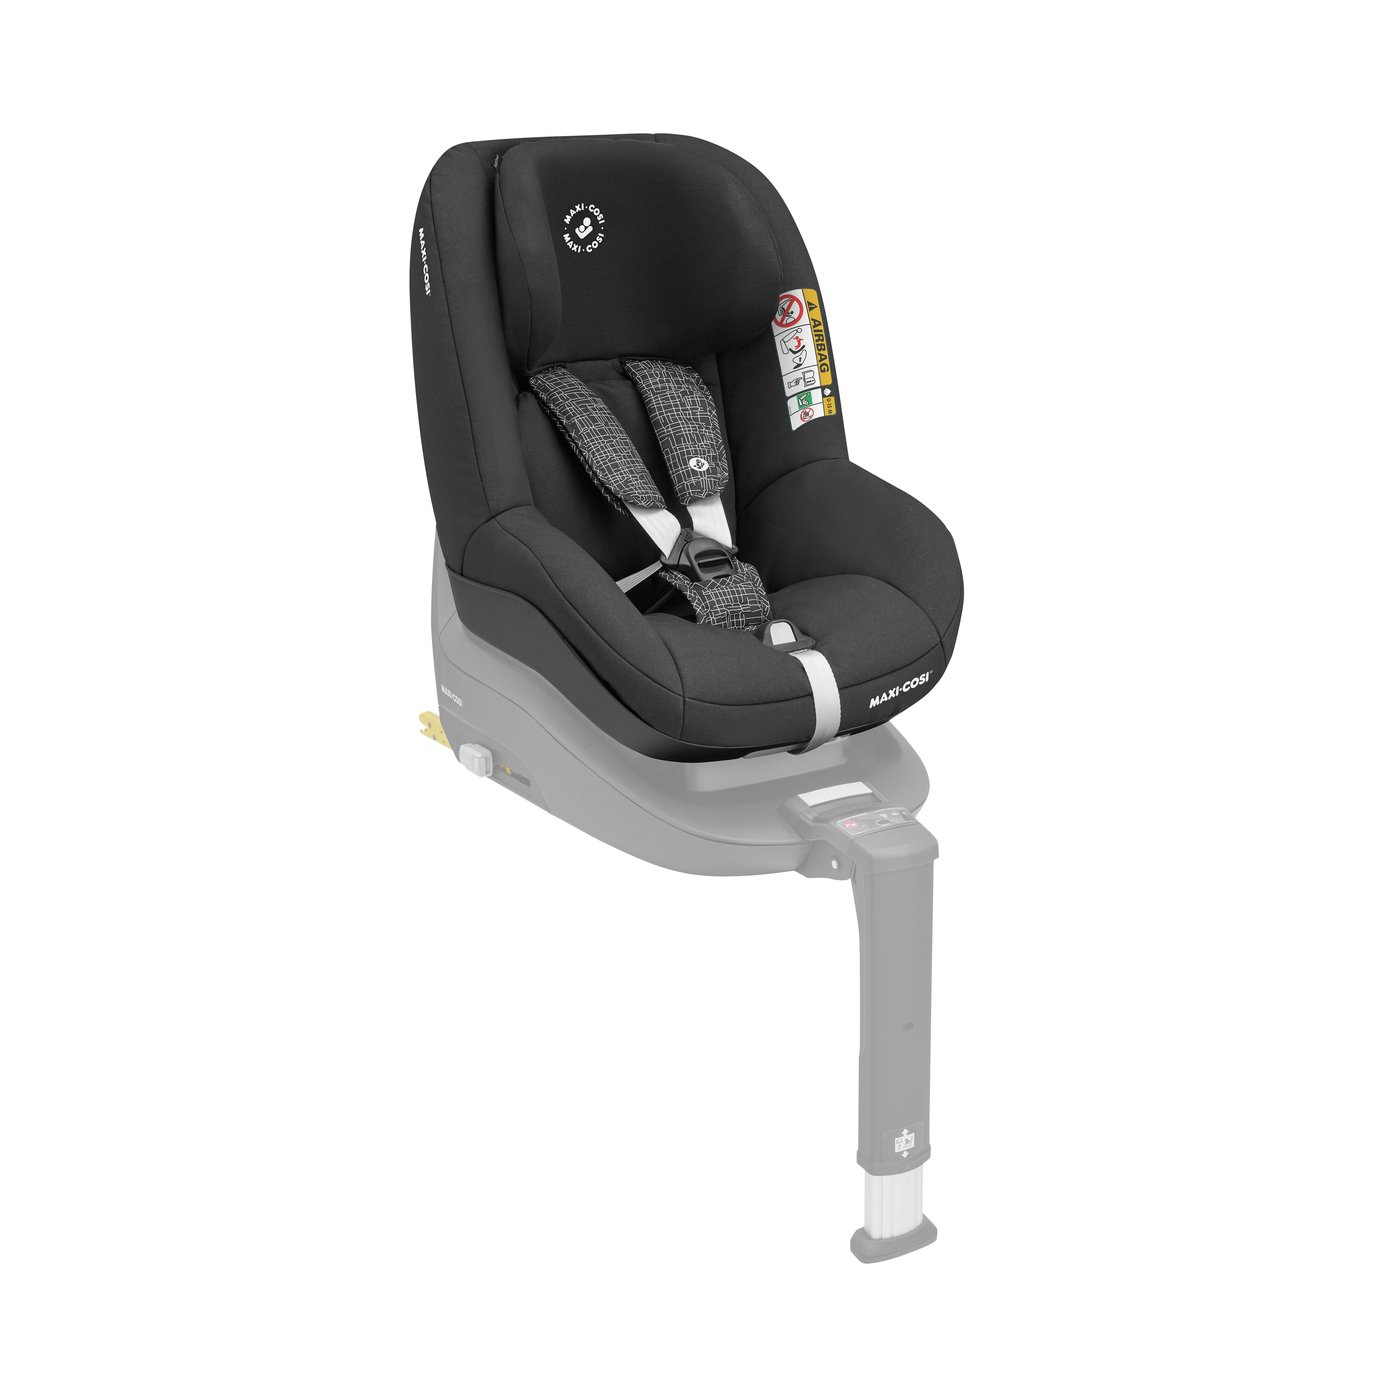 Maxi-Cosi Pearl Group 1 i-Size Car Seat Review